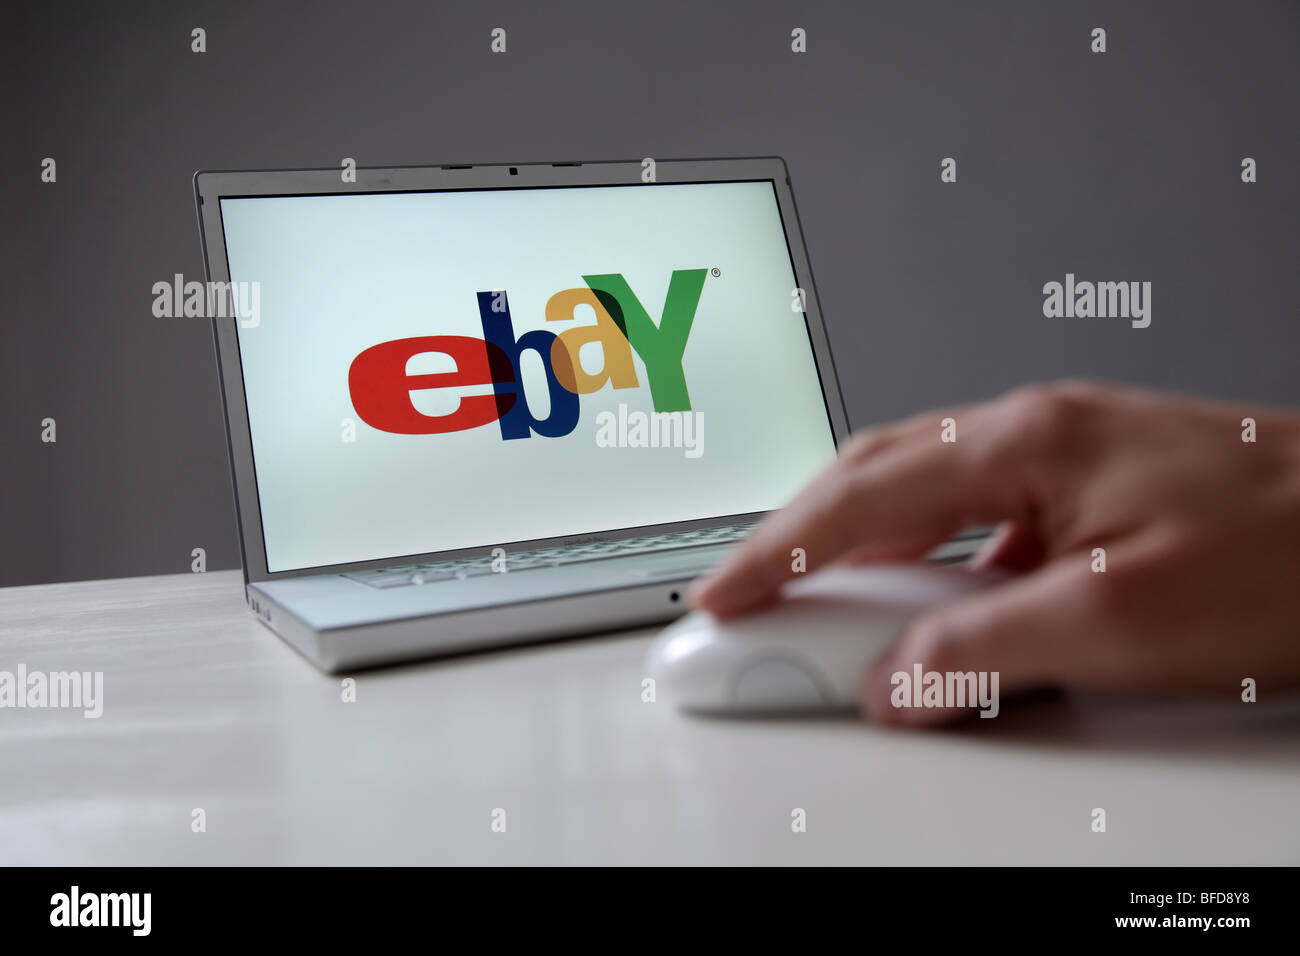 ebay company logo on computer screen. Symbol: Usage of the online auctioneer ebay Stock Photo